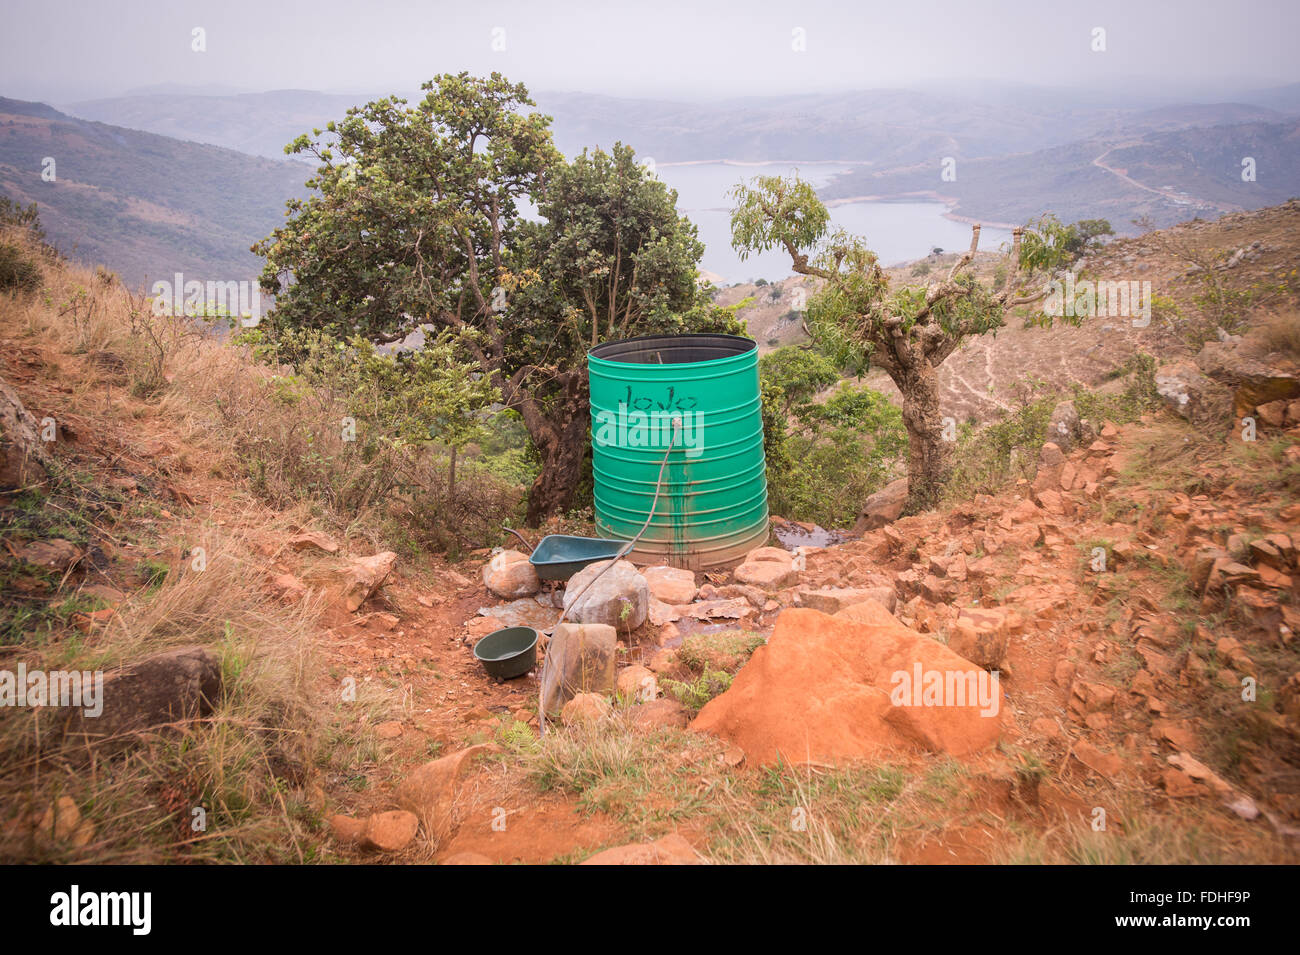 Water supply on the mountain in the Hhohho region of Swaziland, Africa. Stock Photo